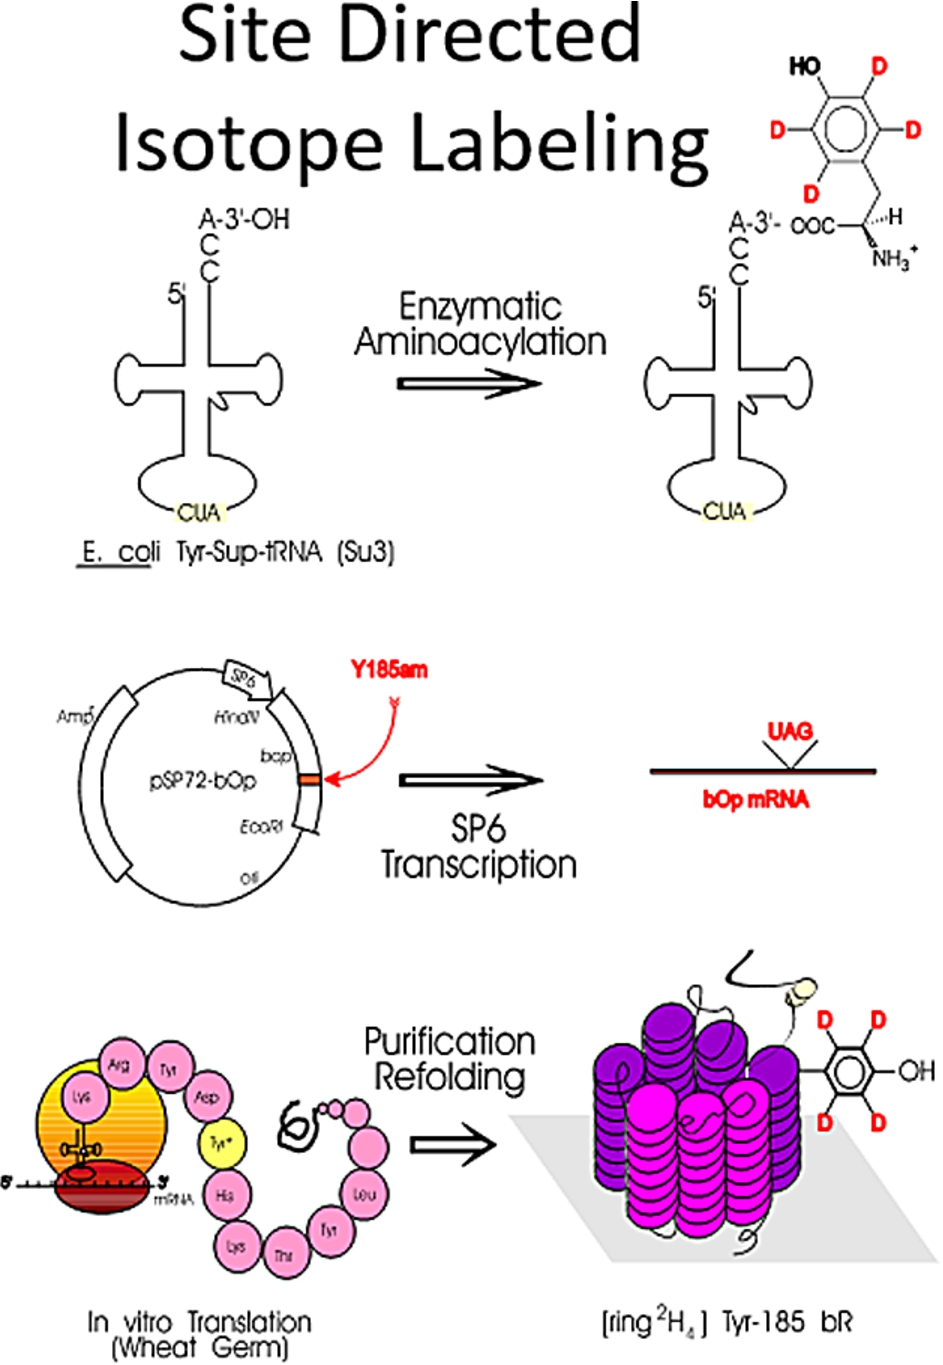 Major steps in site-directed isotope labeling (SDIL) of proteins (adapted from [227]).